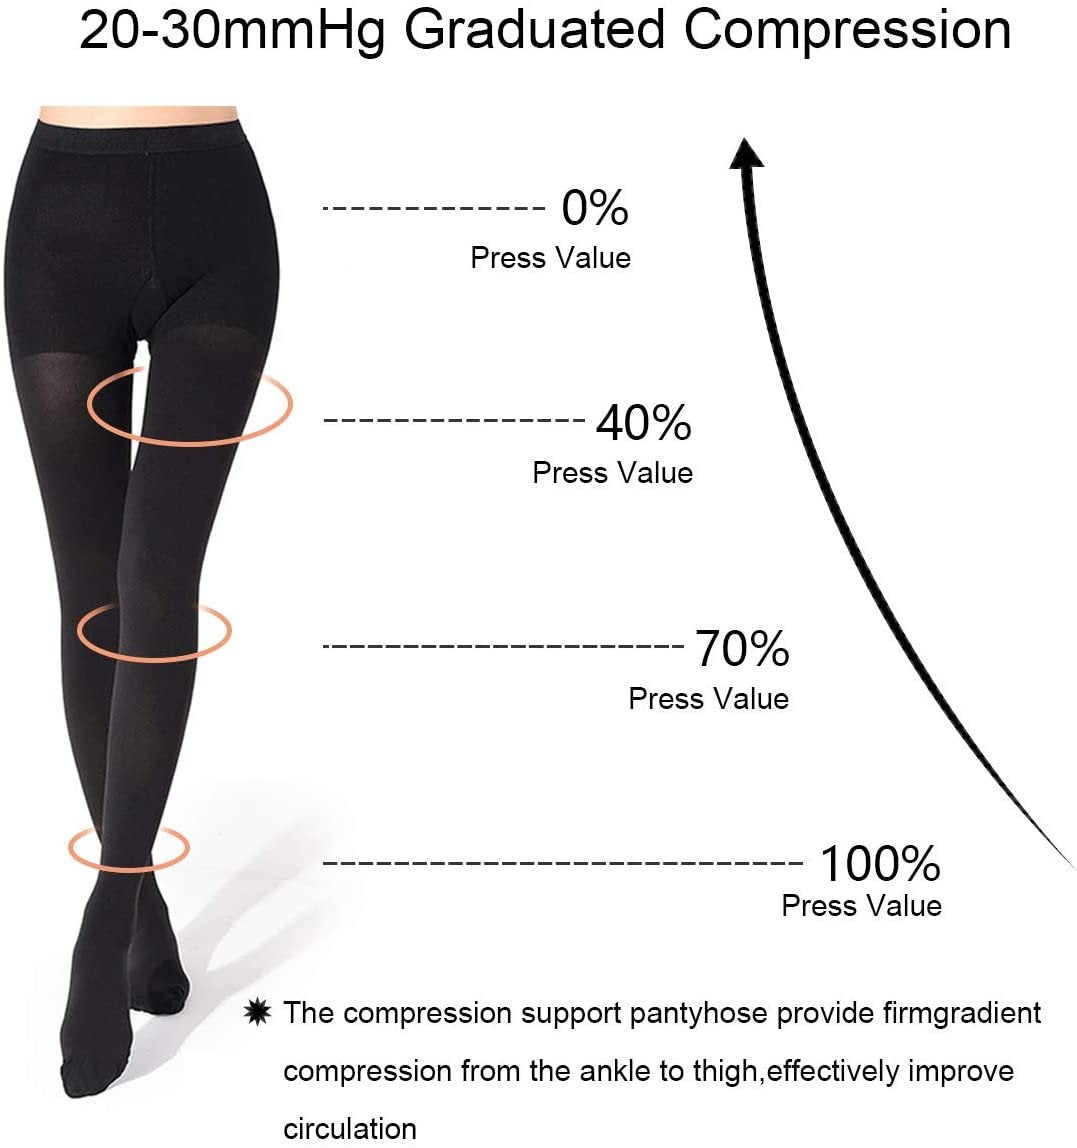 Thigh High Compression Stockings for Varicose Veins 20 30 mmhg